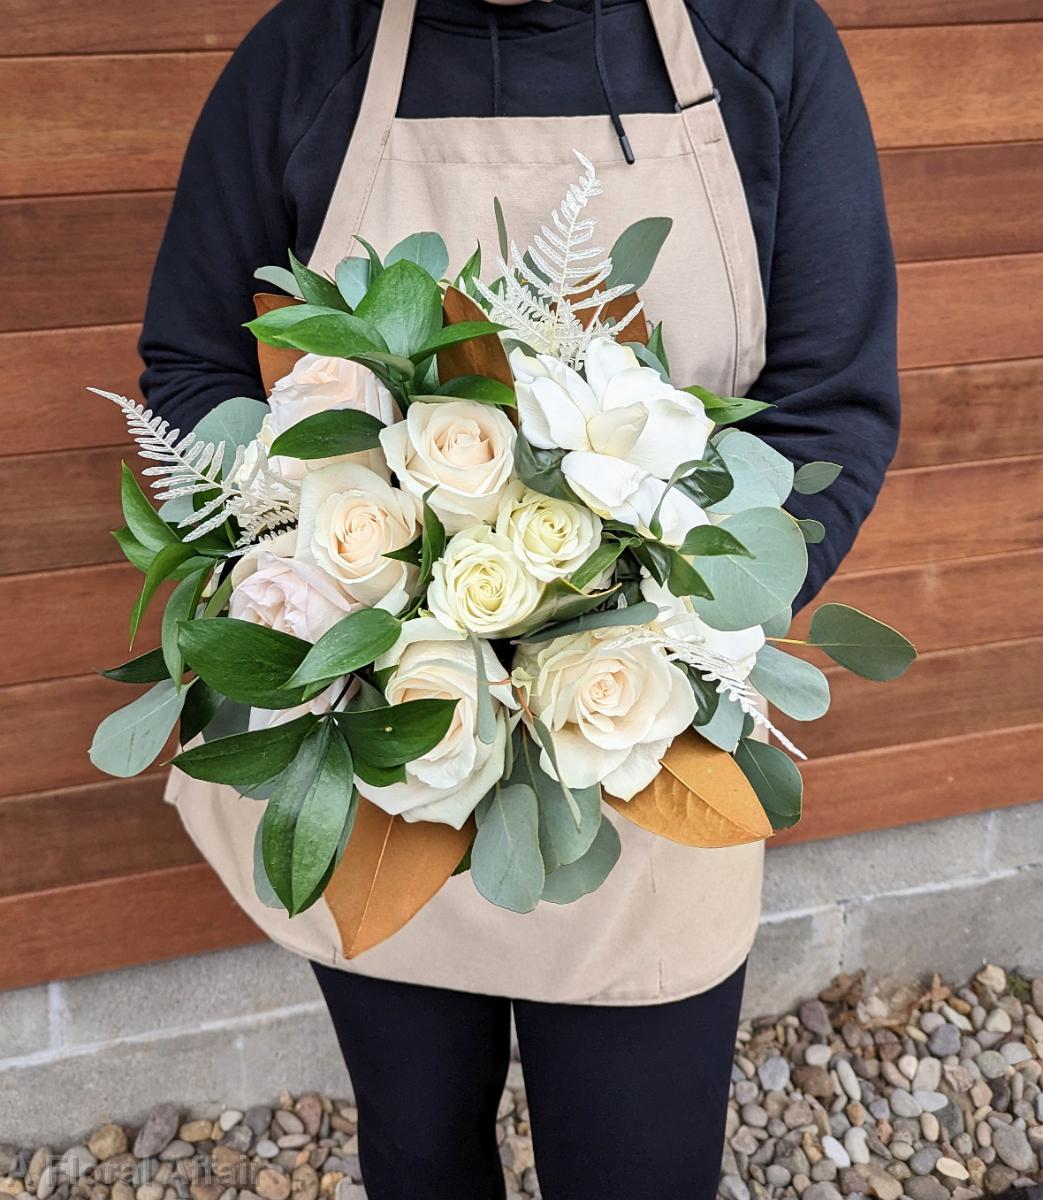 BB1702 - Bridal Bouquet with white roses, gardenias, and magnolia leaves